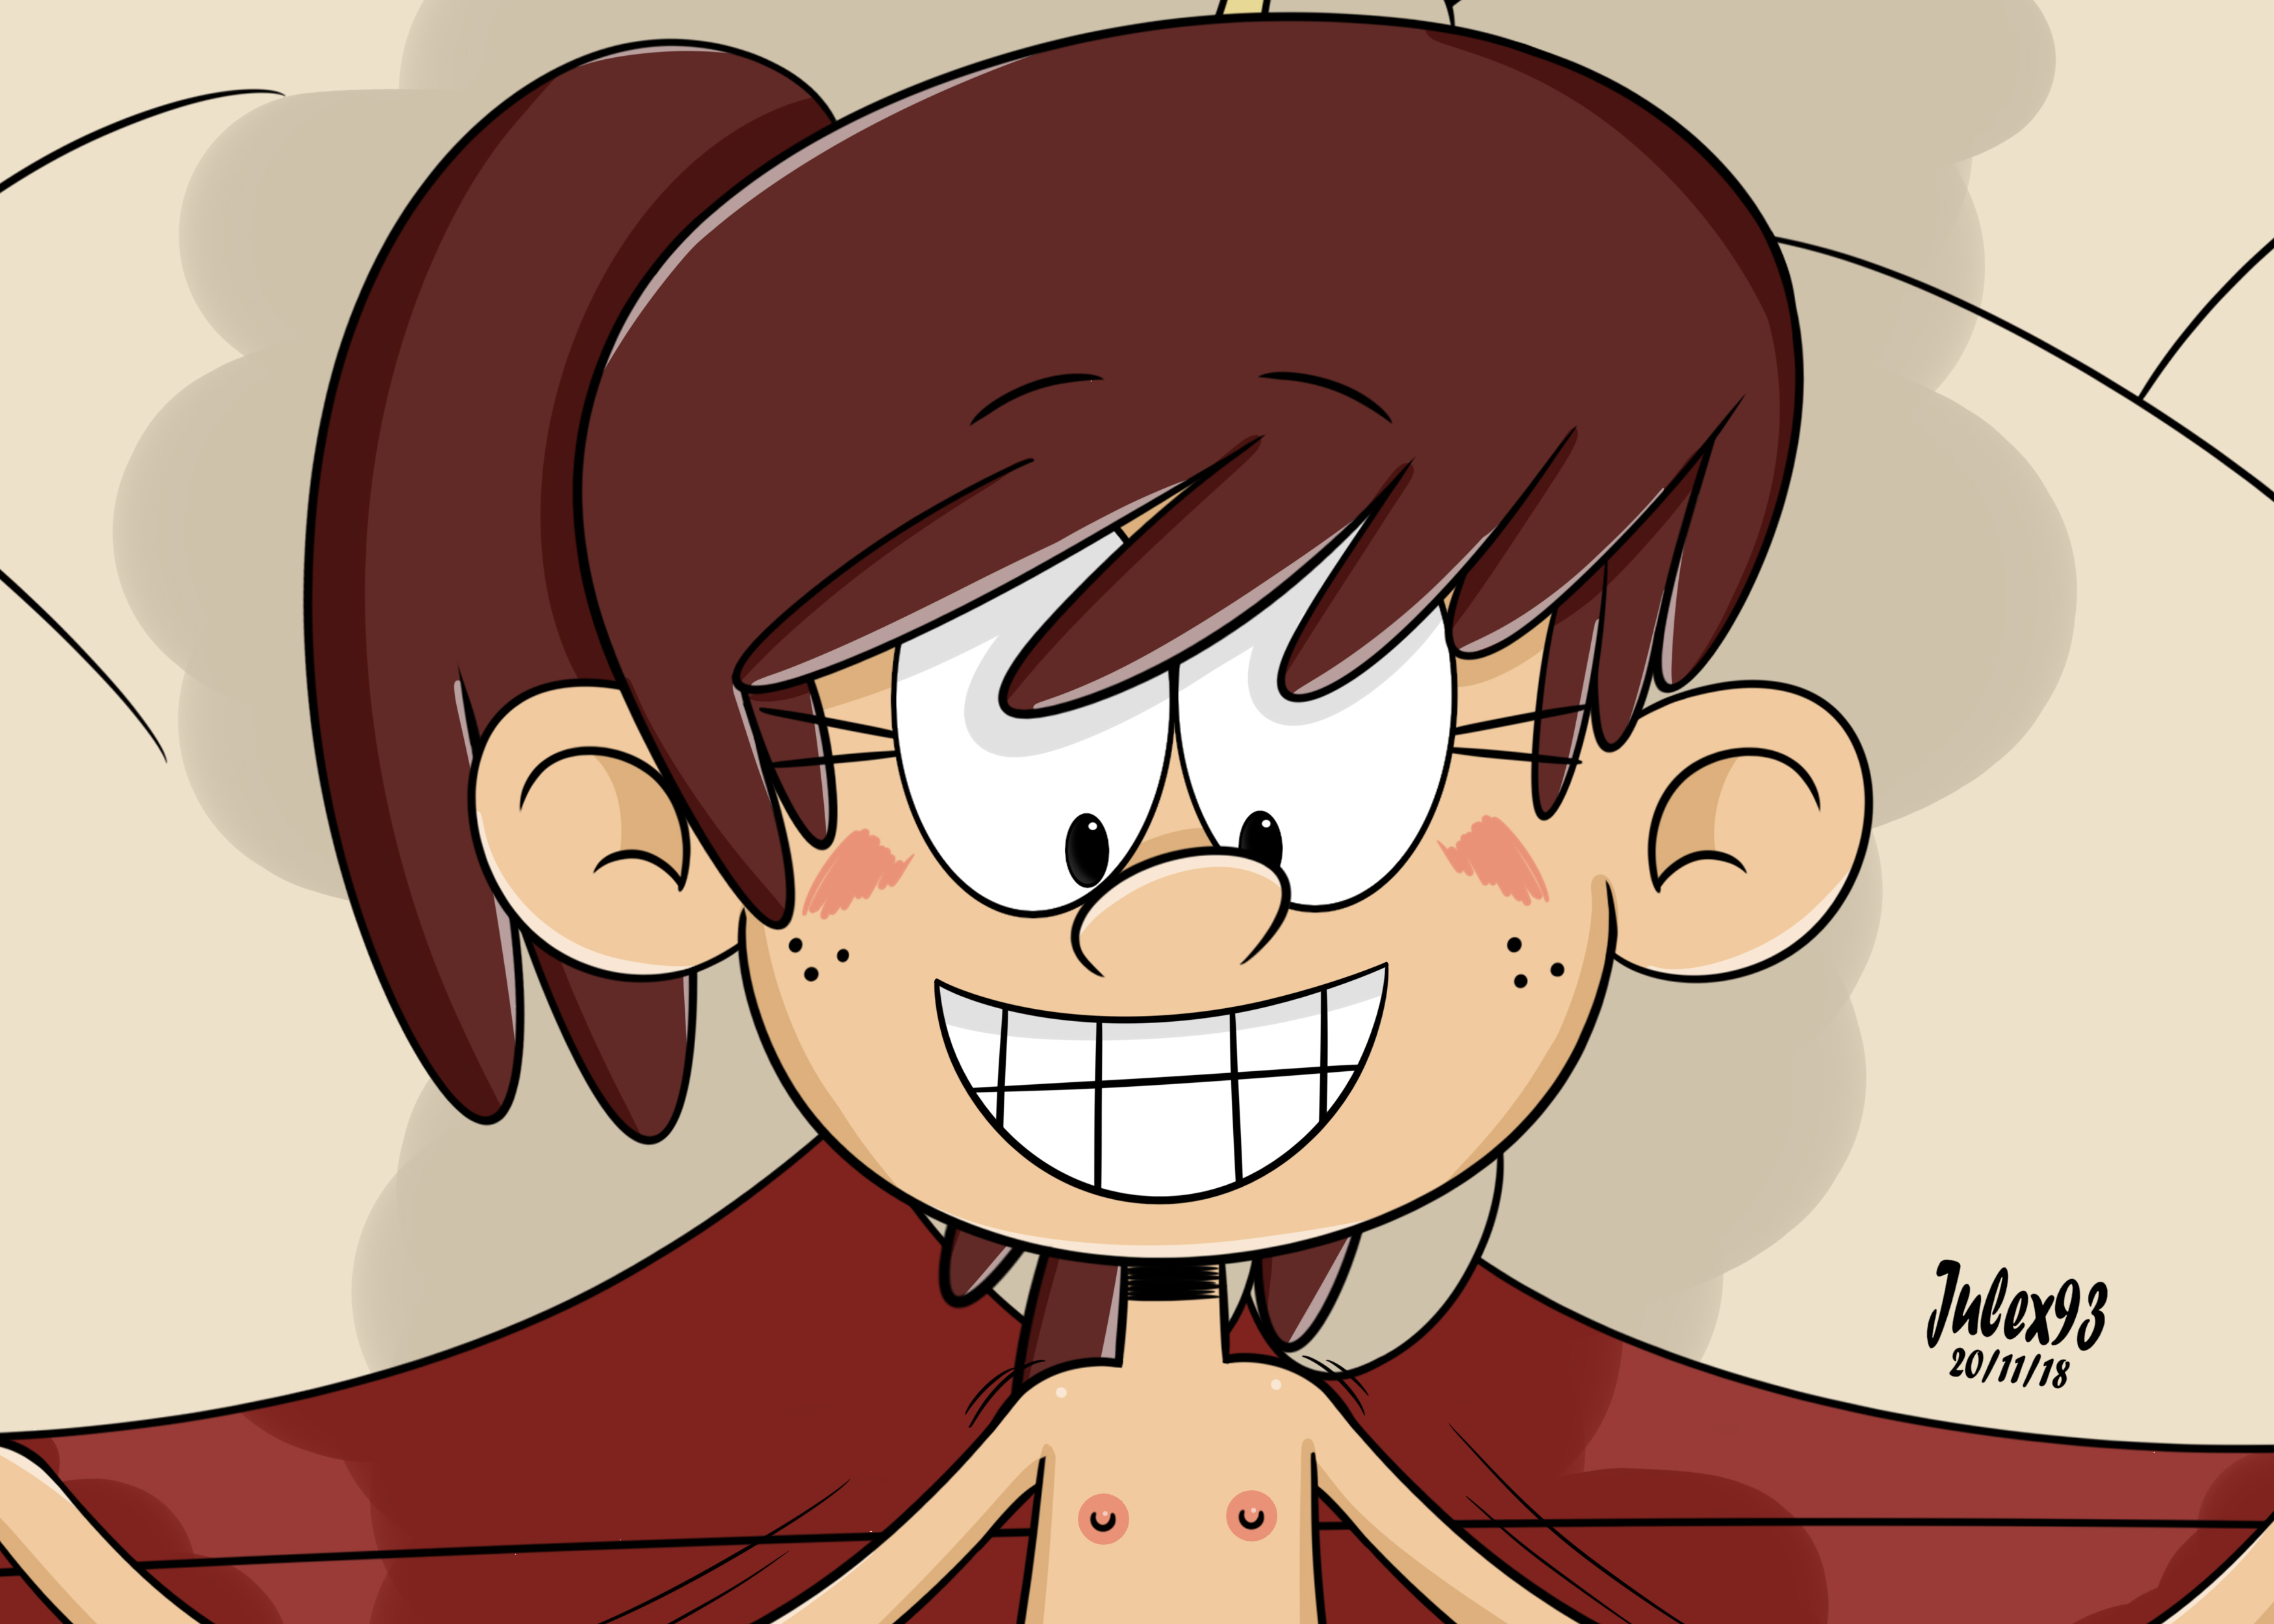 Post 3464064 Julex93 Lynnloud Theloudhouse